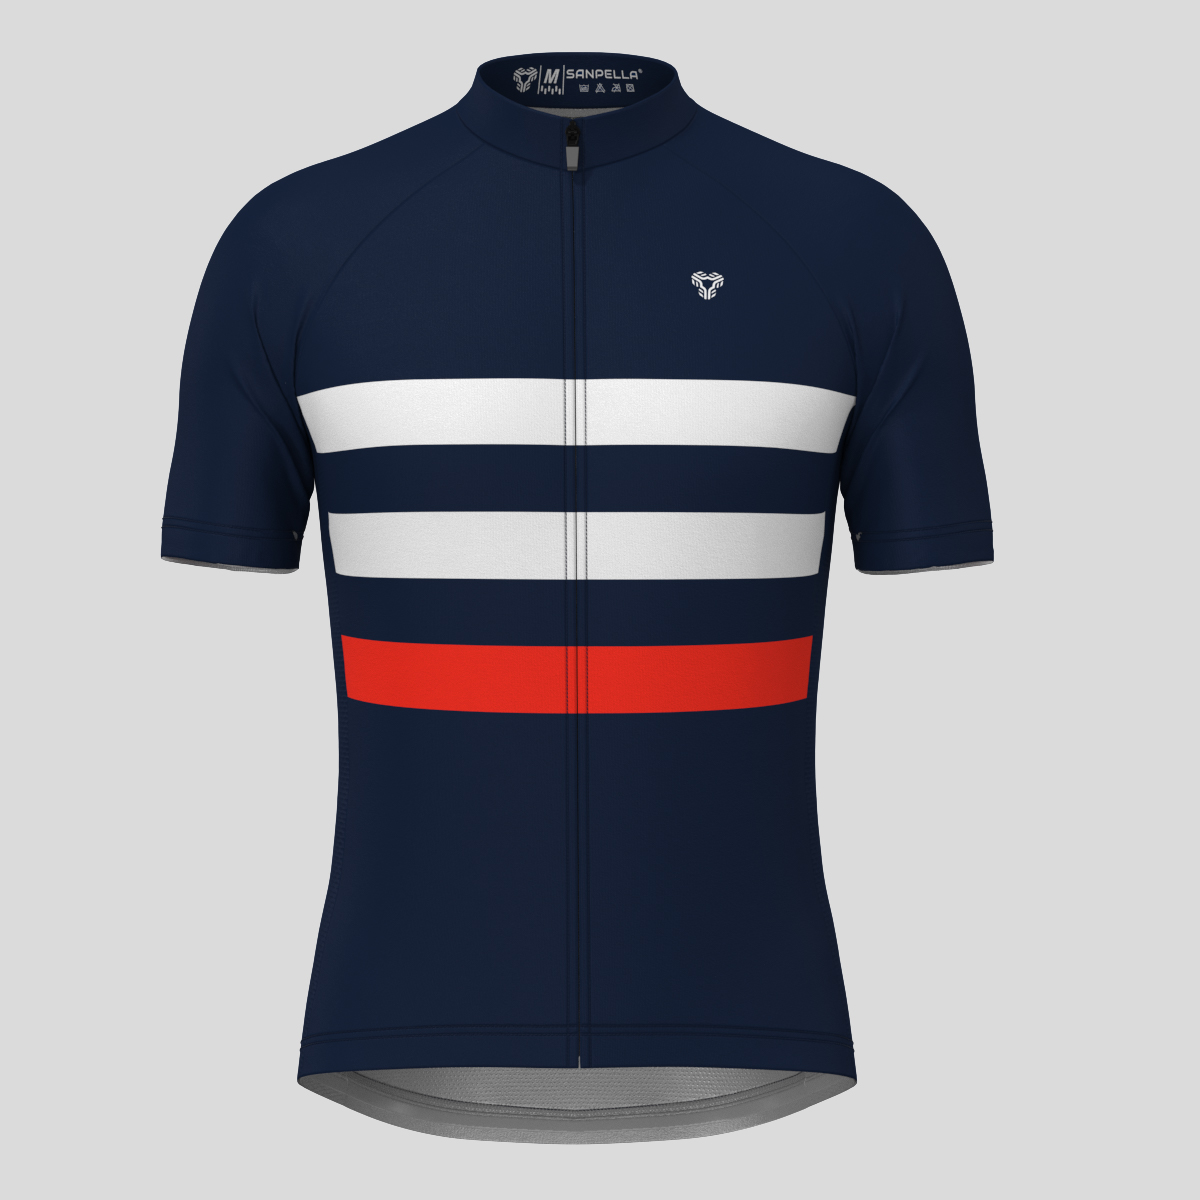 Men's Classic Stripes Cycling Jersey - Navy/White/Red